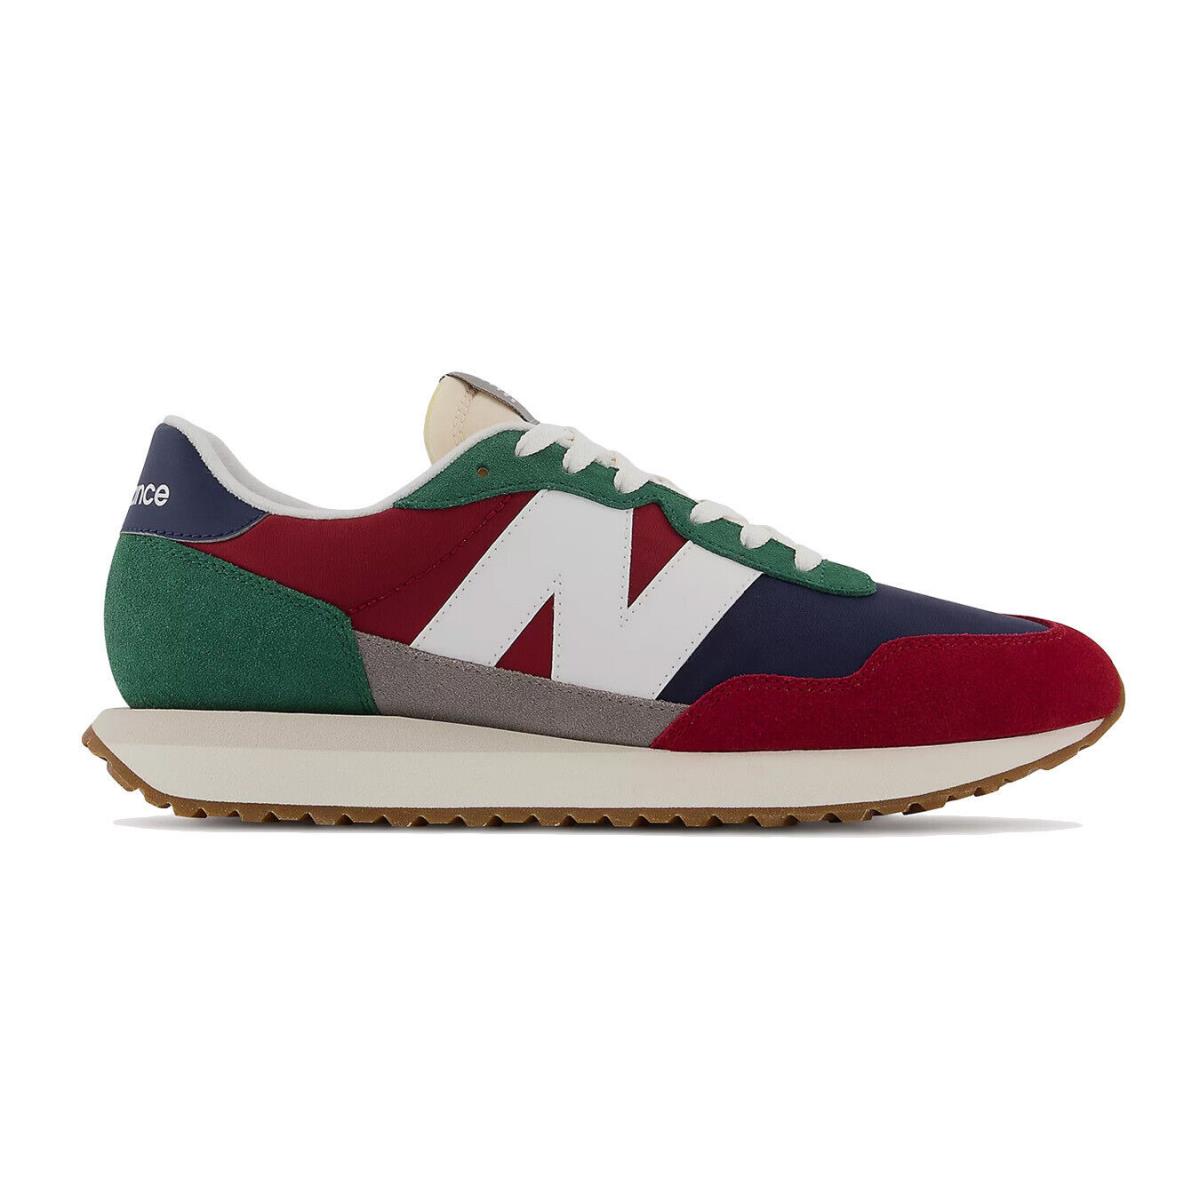 New Balance shoes  - Red/Green/Navy Blue 12